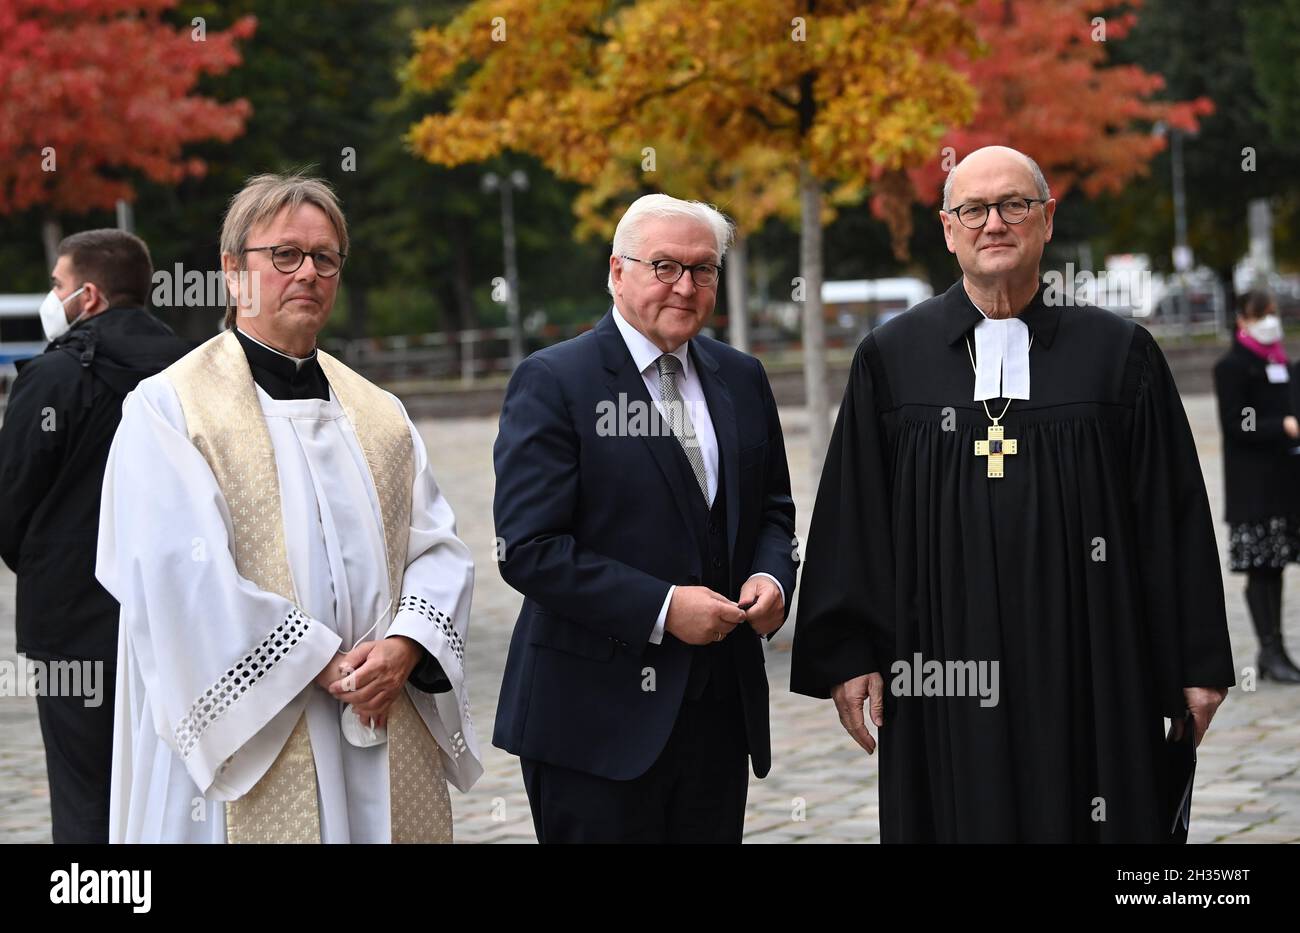 Berlin, Germany. 26th Oct, 2021. The Plenipotentiary of the Council of the Evangelical Church in Germany (EKD), Martin Dutzmann (r), and the Head of the Catholic Office in Berlin, Prelate Karl Jüsten (l), receive Federal President Franl-Walter Steinmeier for the ecumenical service in the St. Mary's Church in Berlin before the constituent session of the new Bundestag. Credit: Britta Pedersen/dpa/Alamy Live News Stock Photo